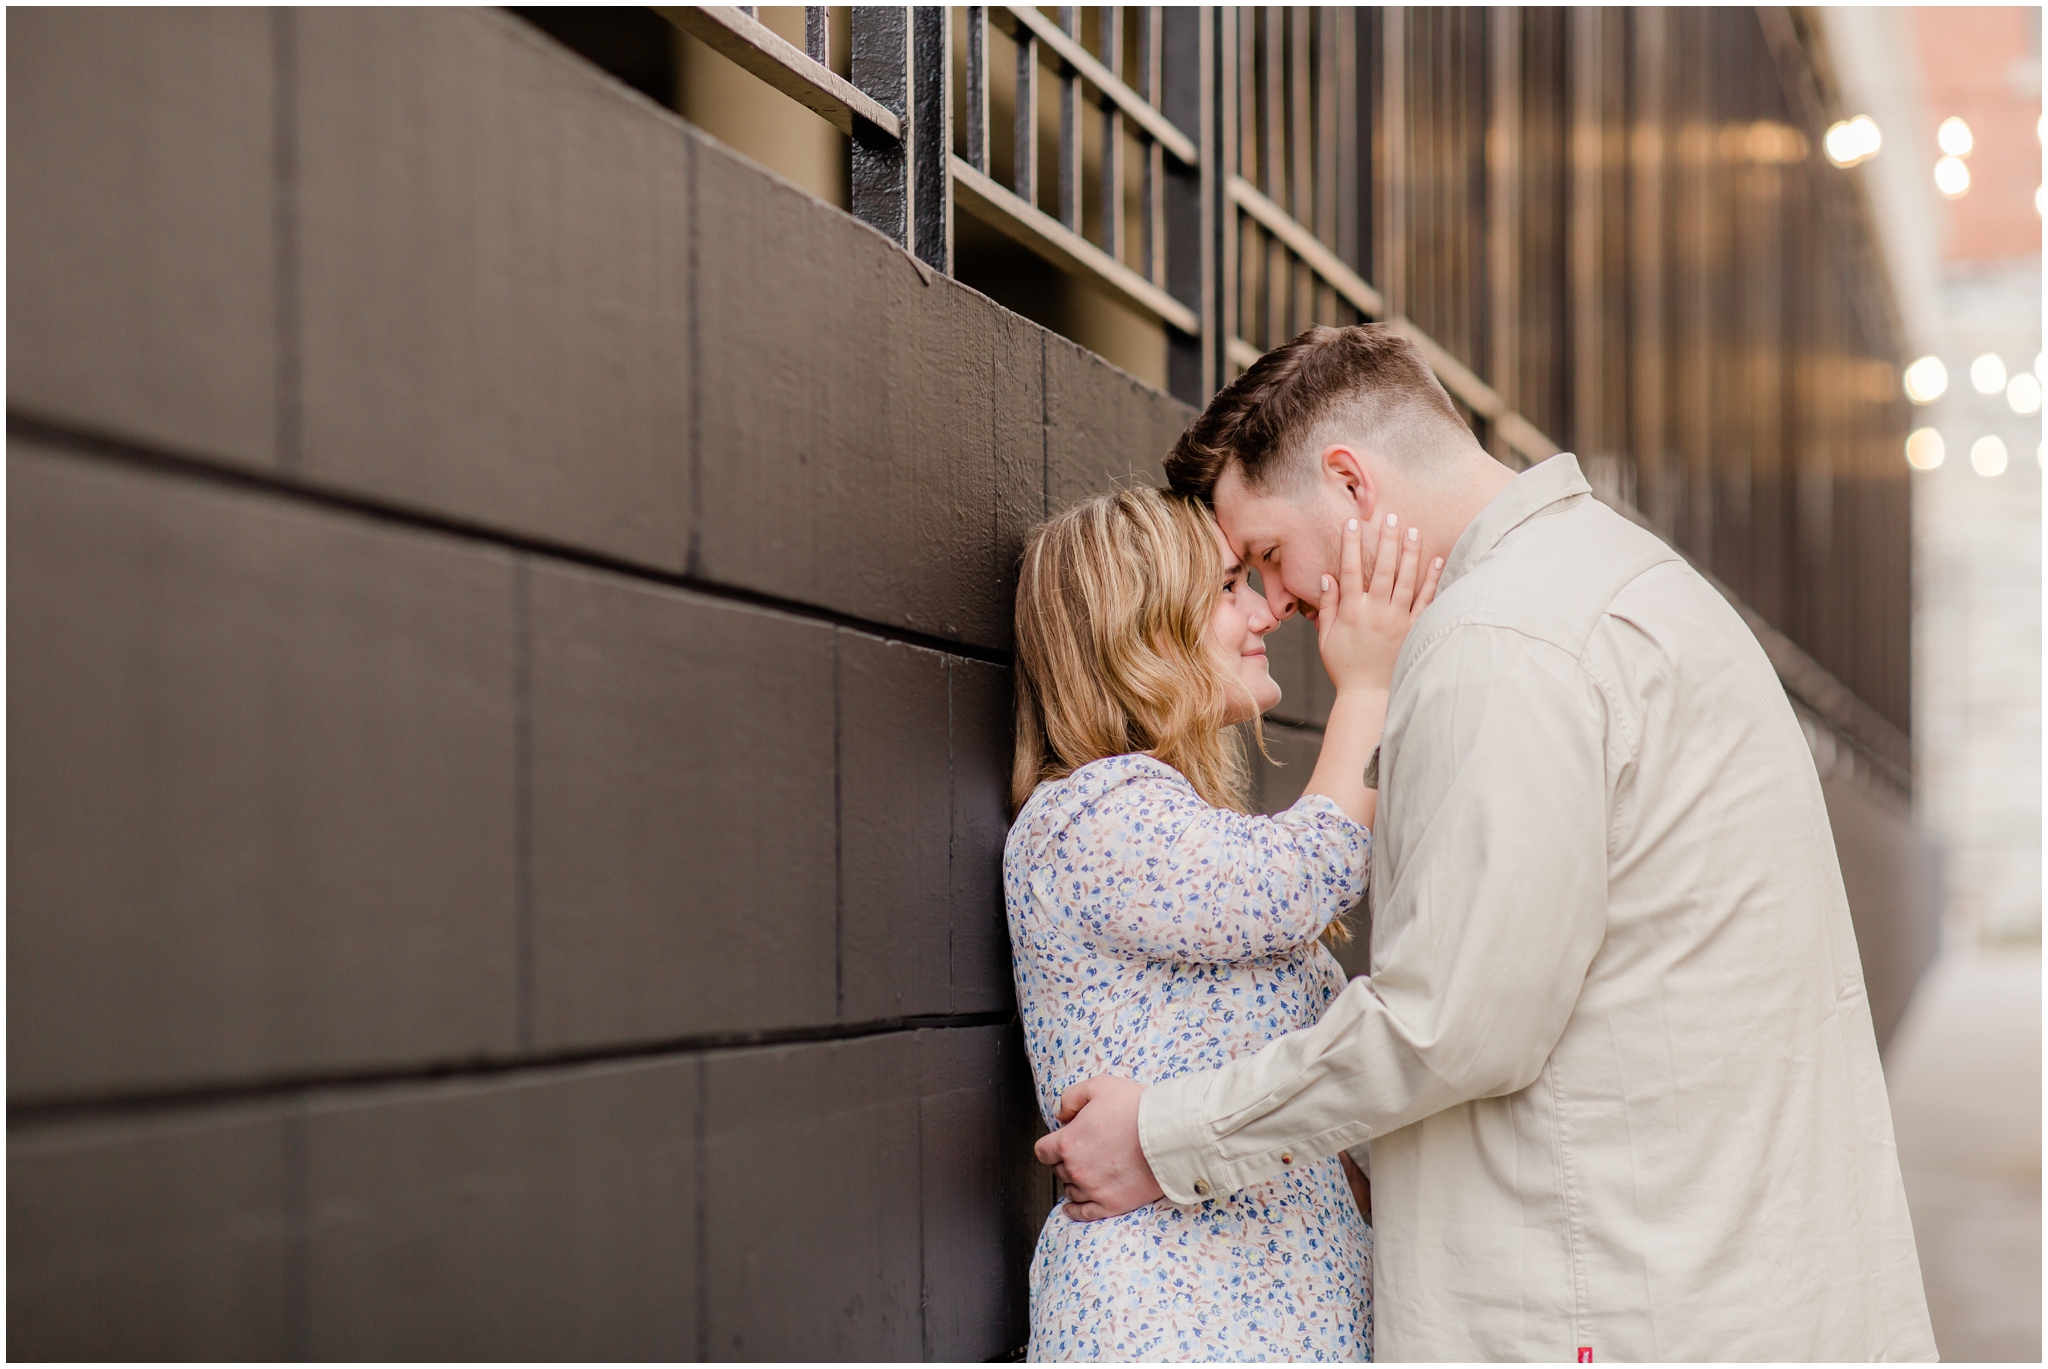 natalie & devin's engagement session in downtown chattanooga with wedding photographer alyssa rachelle photography